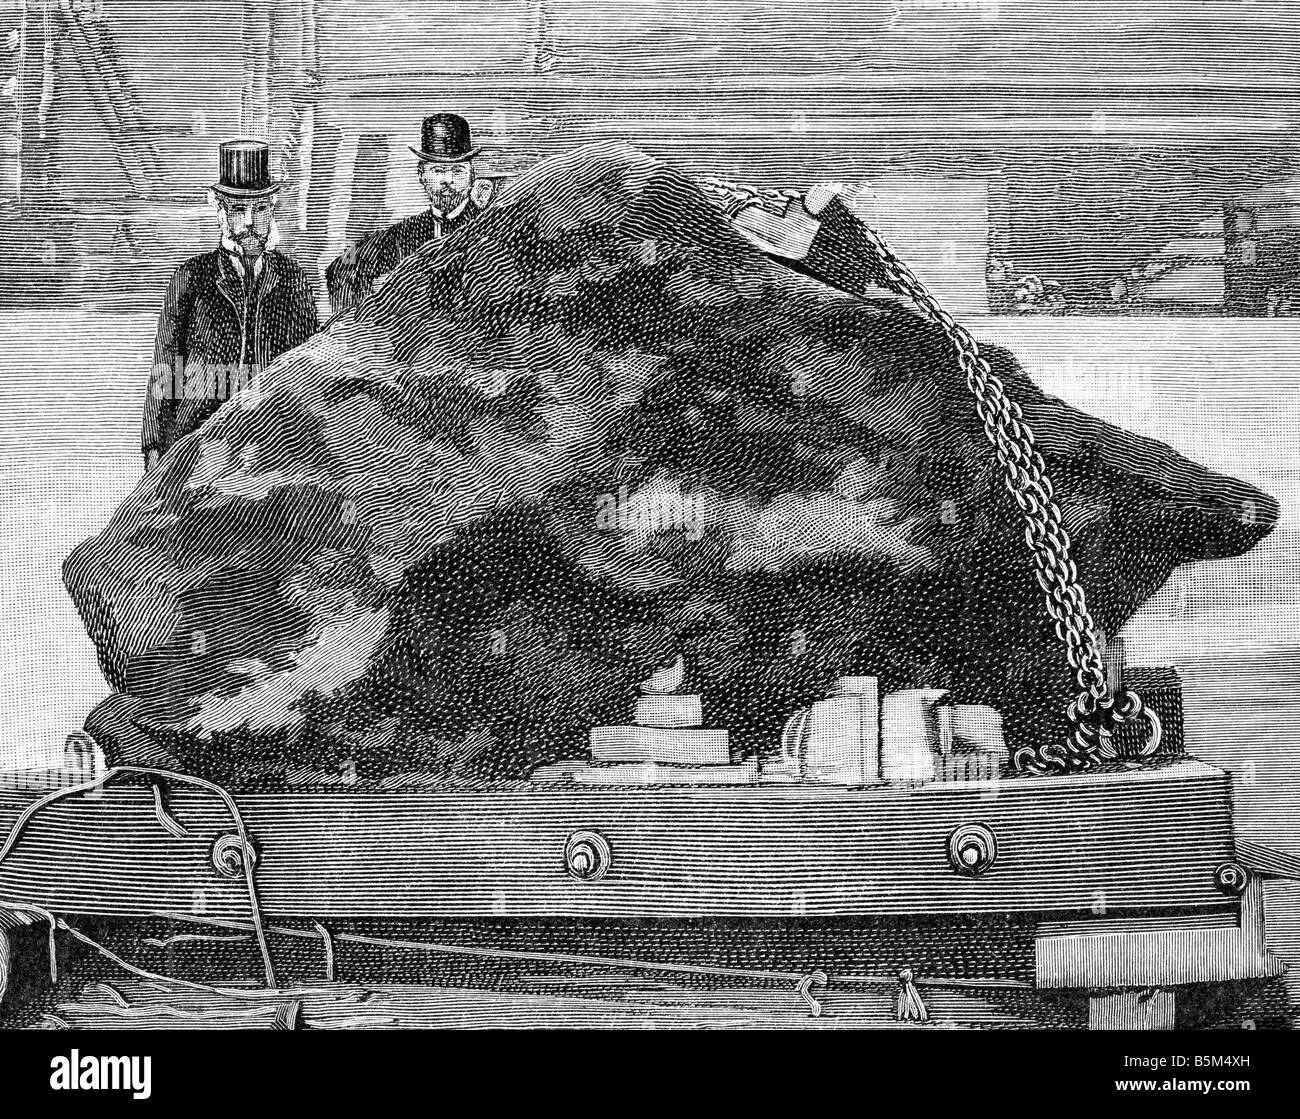 astronomy, meteorites, Cape York Meteorite, discoverd 1818 by John Ross, recoered by Robert Peary 1897, arrival in Brookly, New York, 2.10.1897, wood engraving, iron, USA, science, Greenland, 19th century, historic, historical, people, Stock Photo